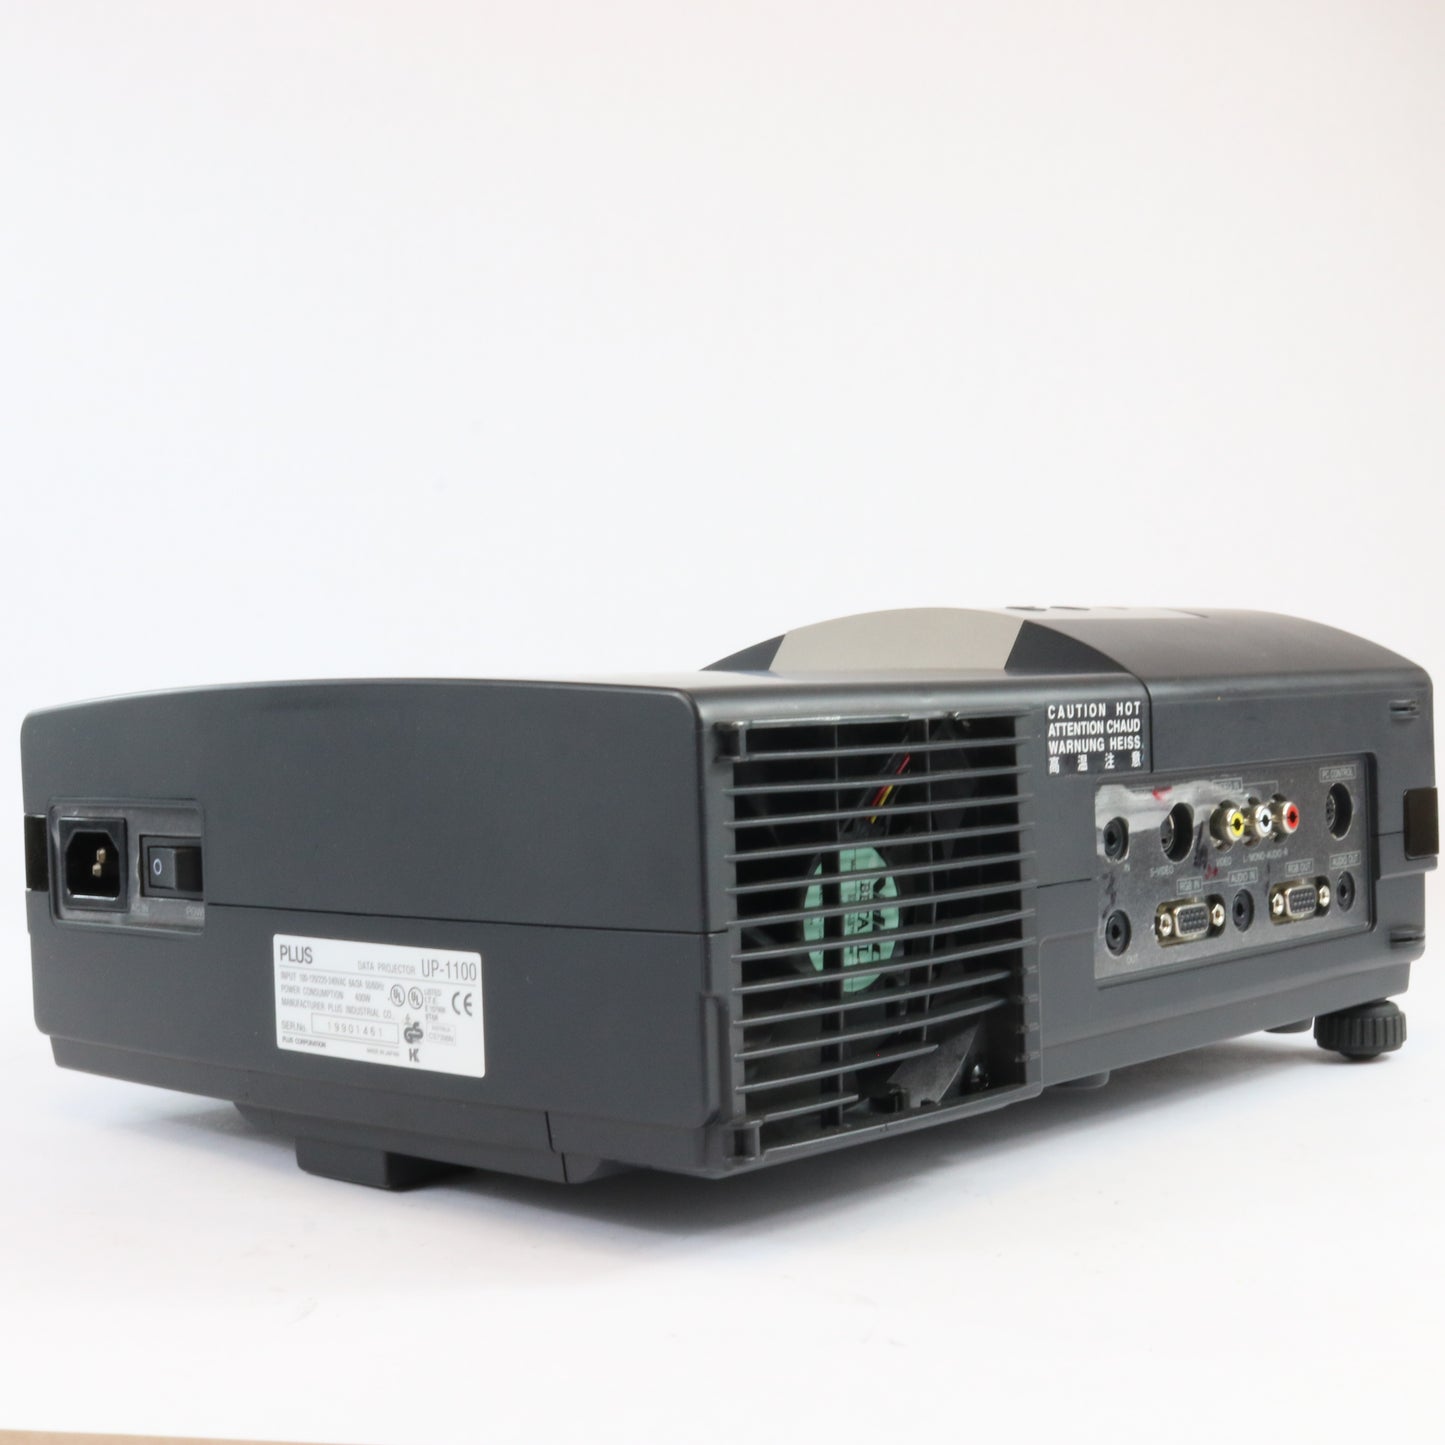 Philips Plus Up-1100 Data Projector